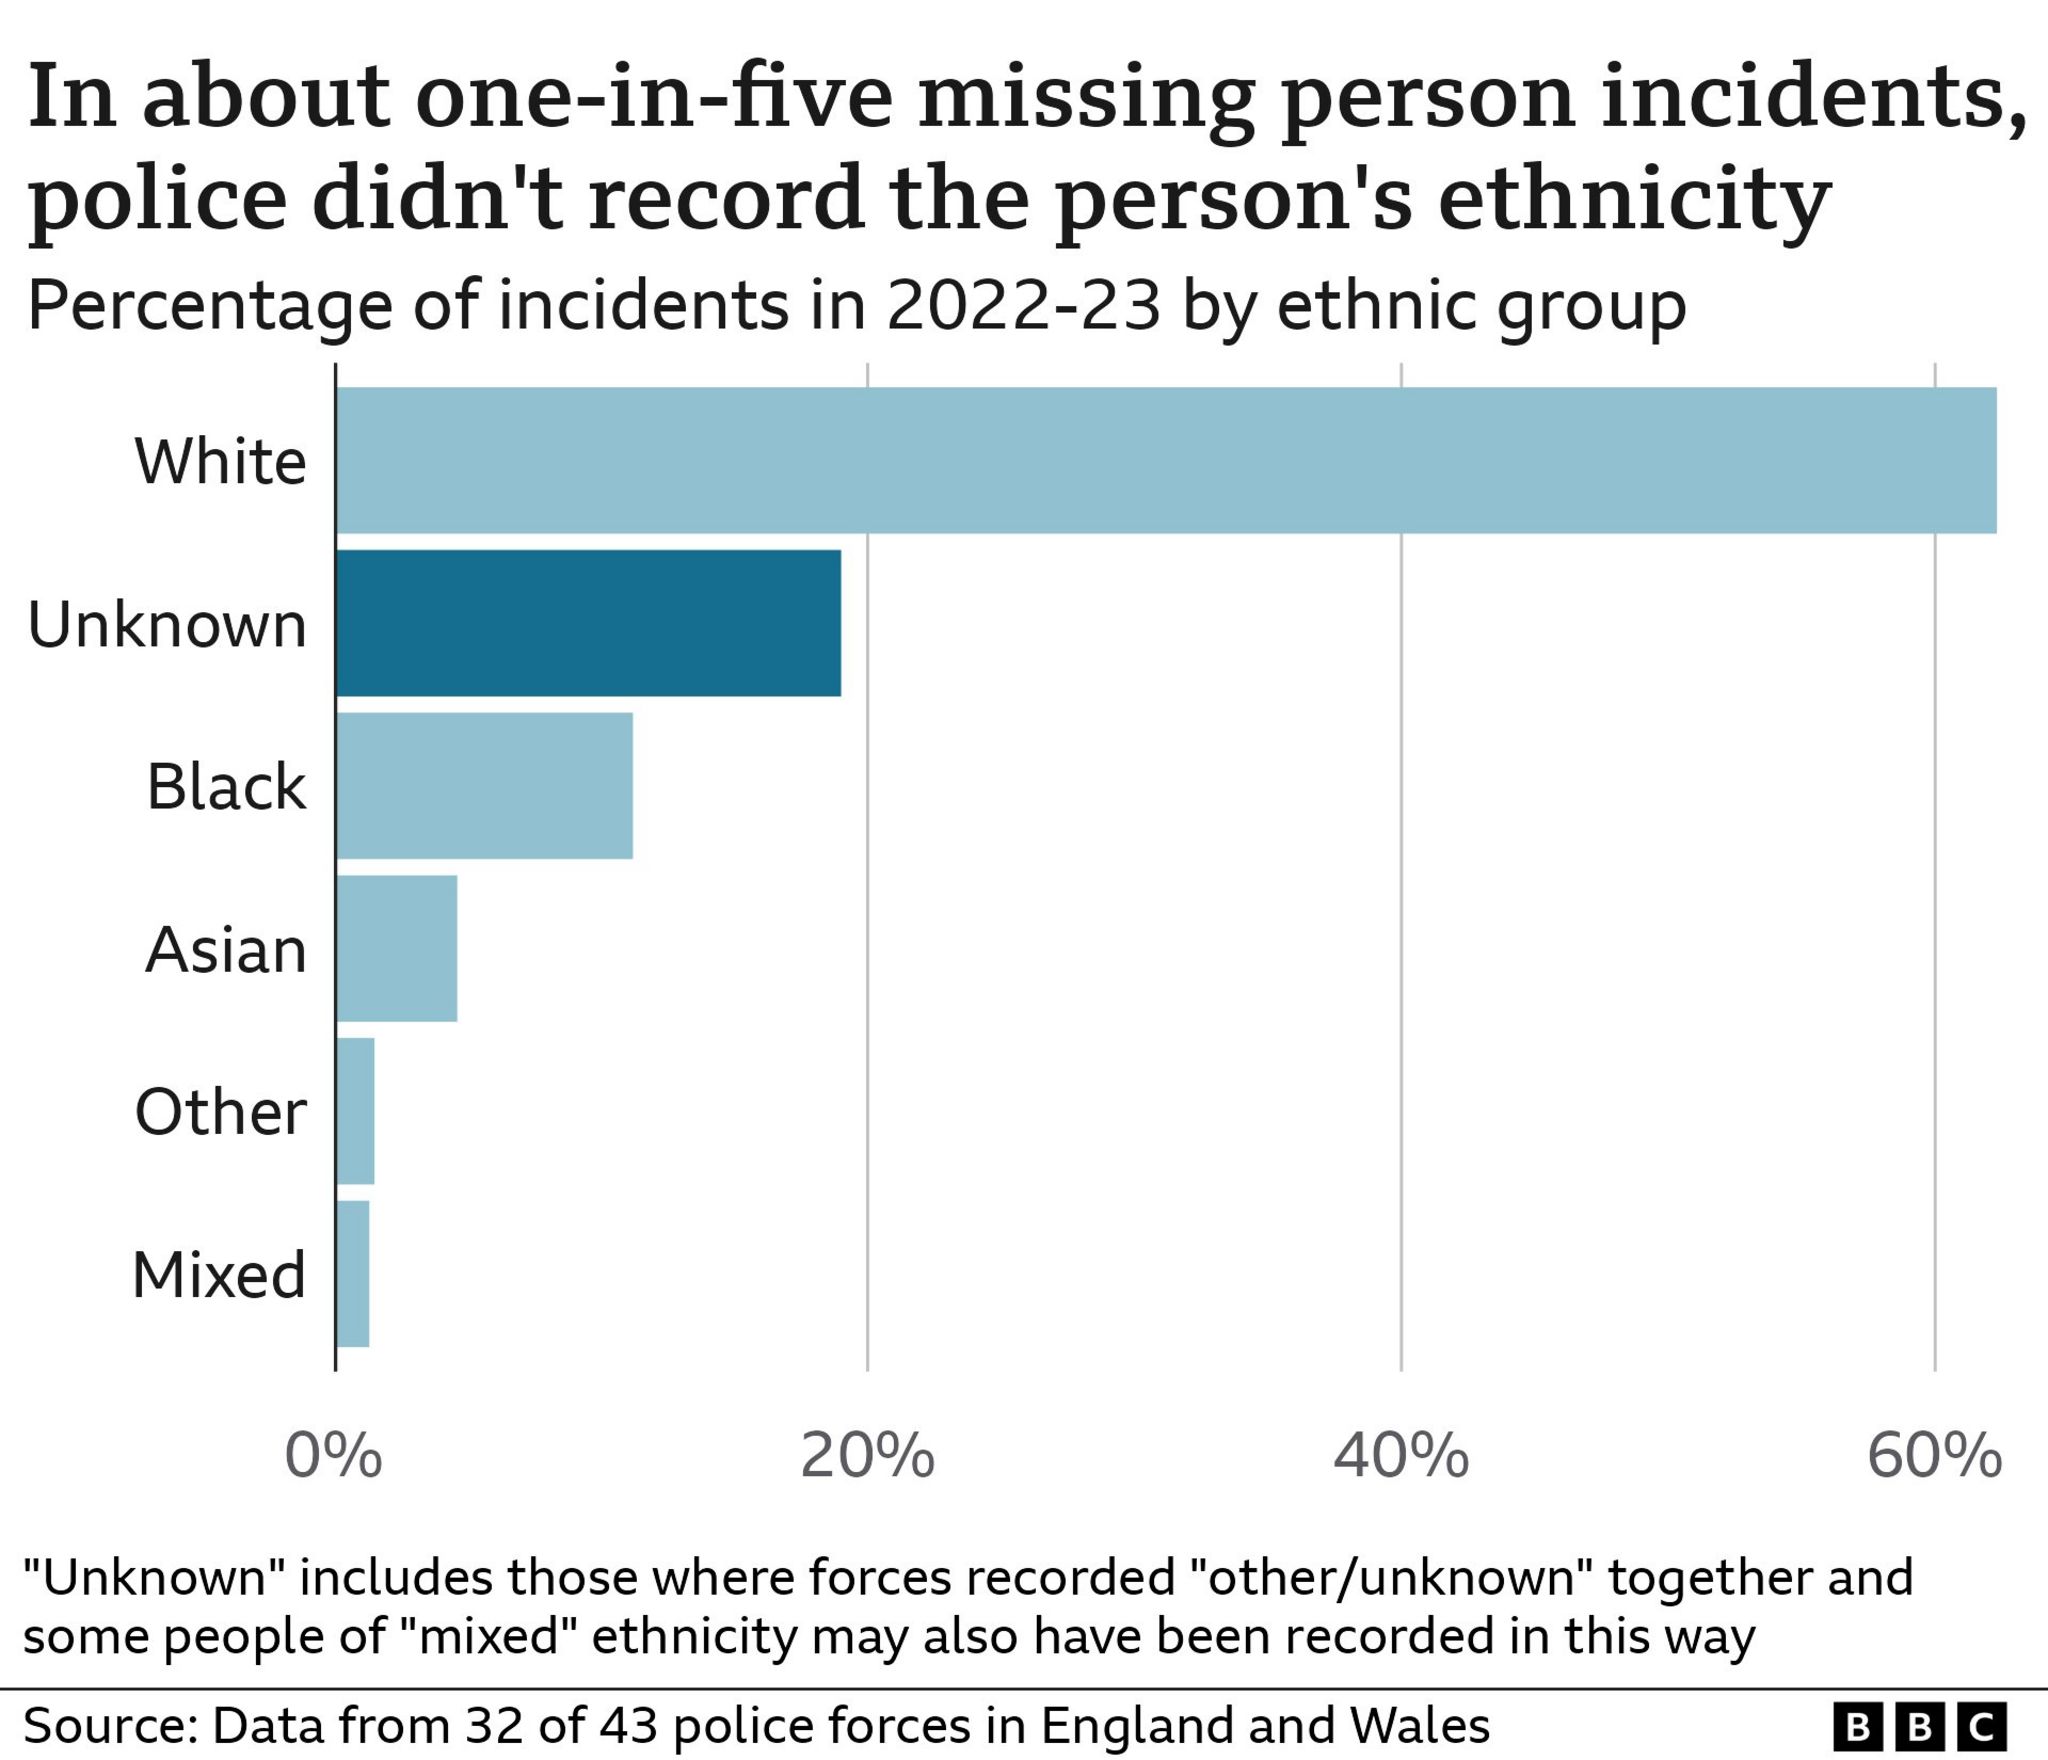 Graphic showing percentage of missing person incidents recorded as "unknown"